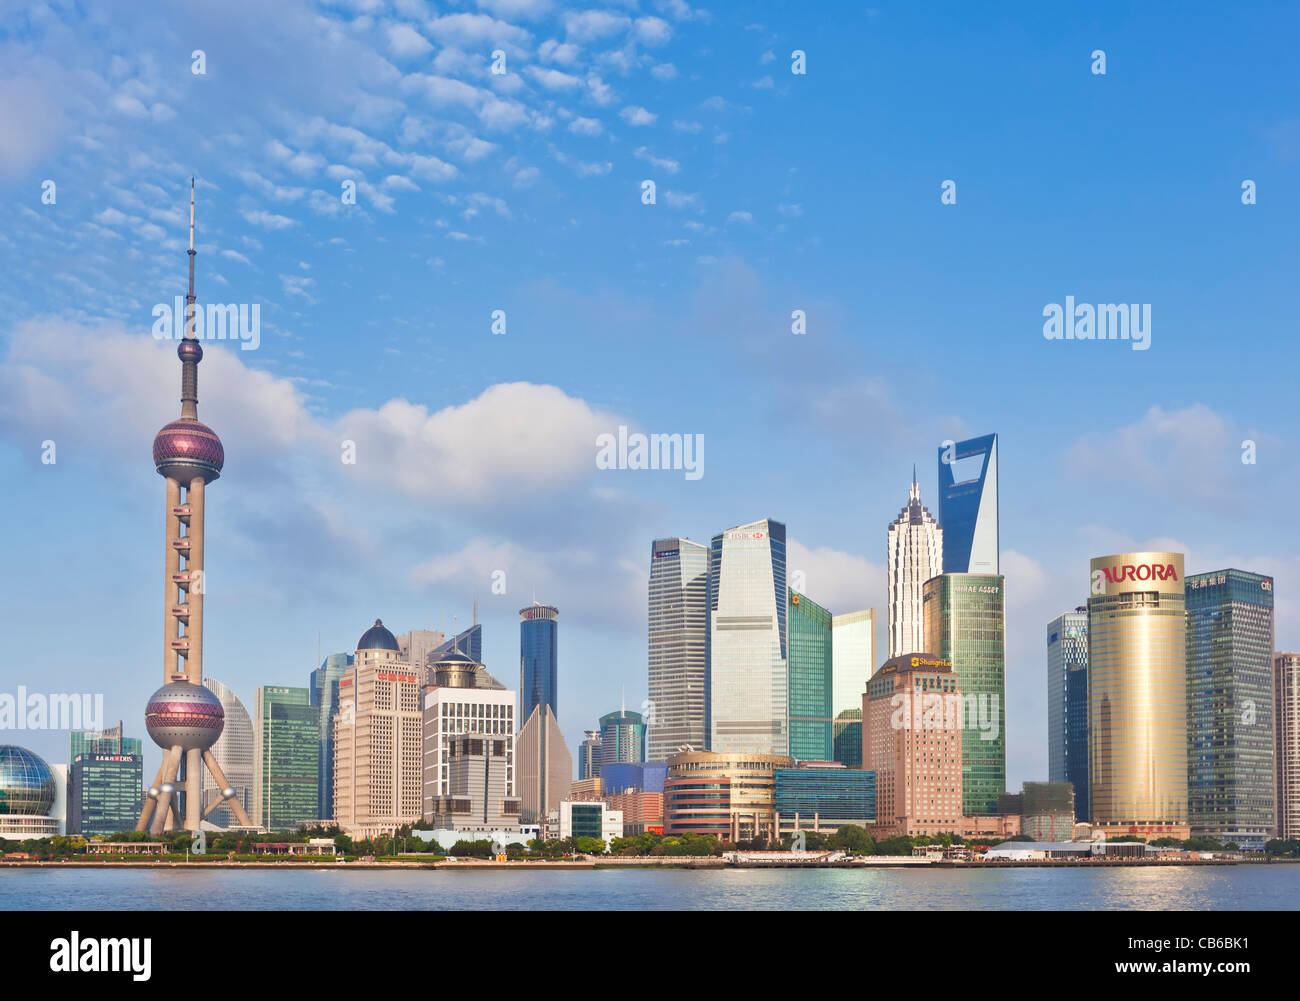 shanghai skyline with the world financial center and oriental pearl buildings the Pudong PRC, People's Republic of China, Asia Stock Photo